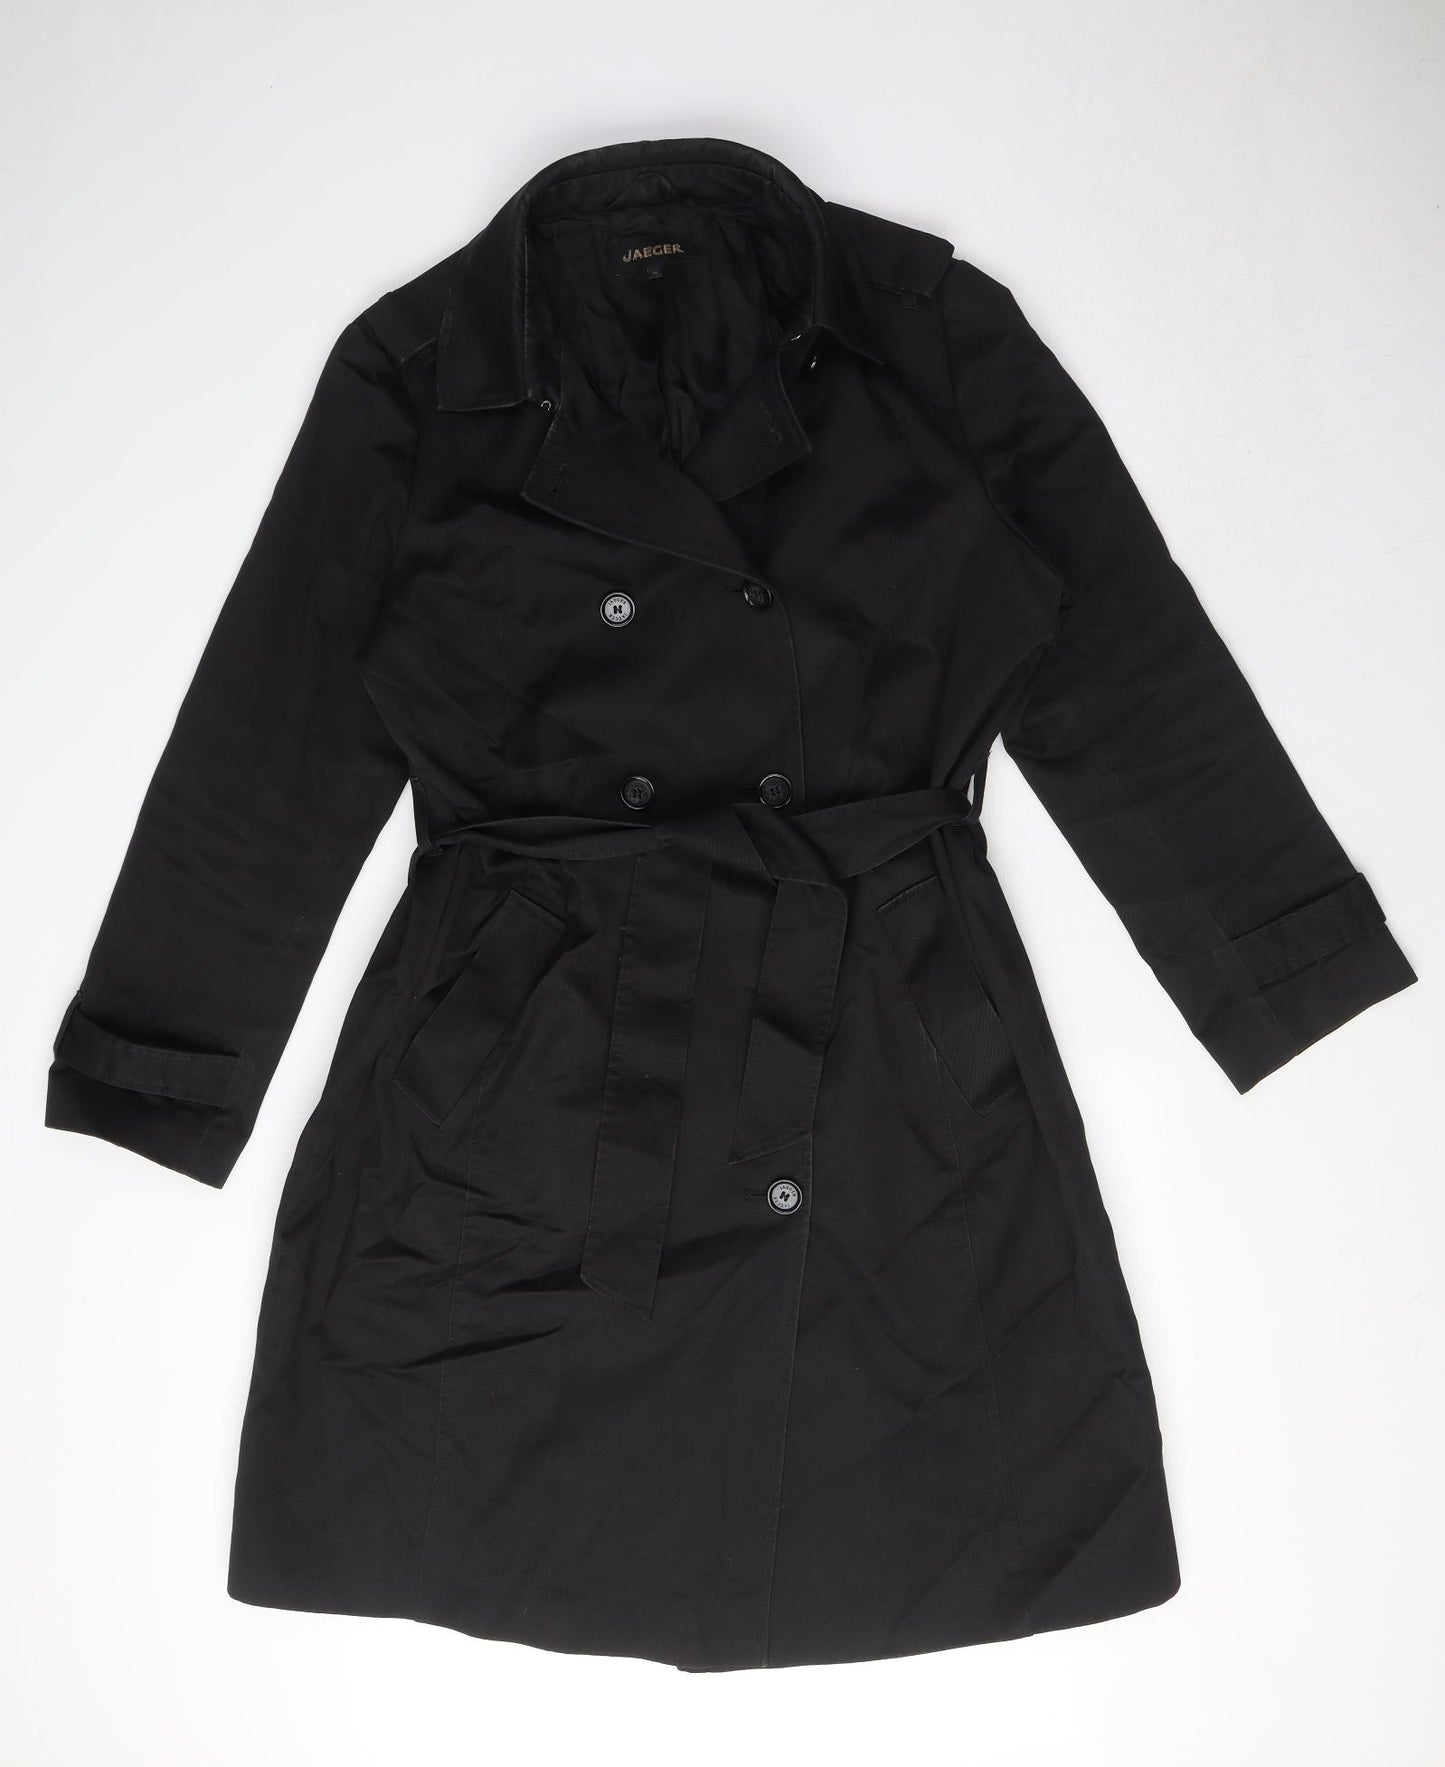 Jaeger Womens Black Trench Coat Coat Size 16 Button